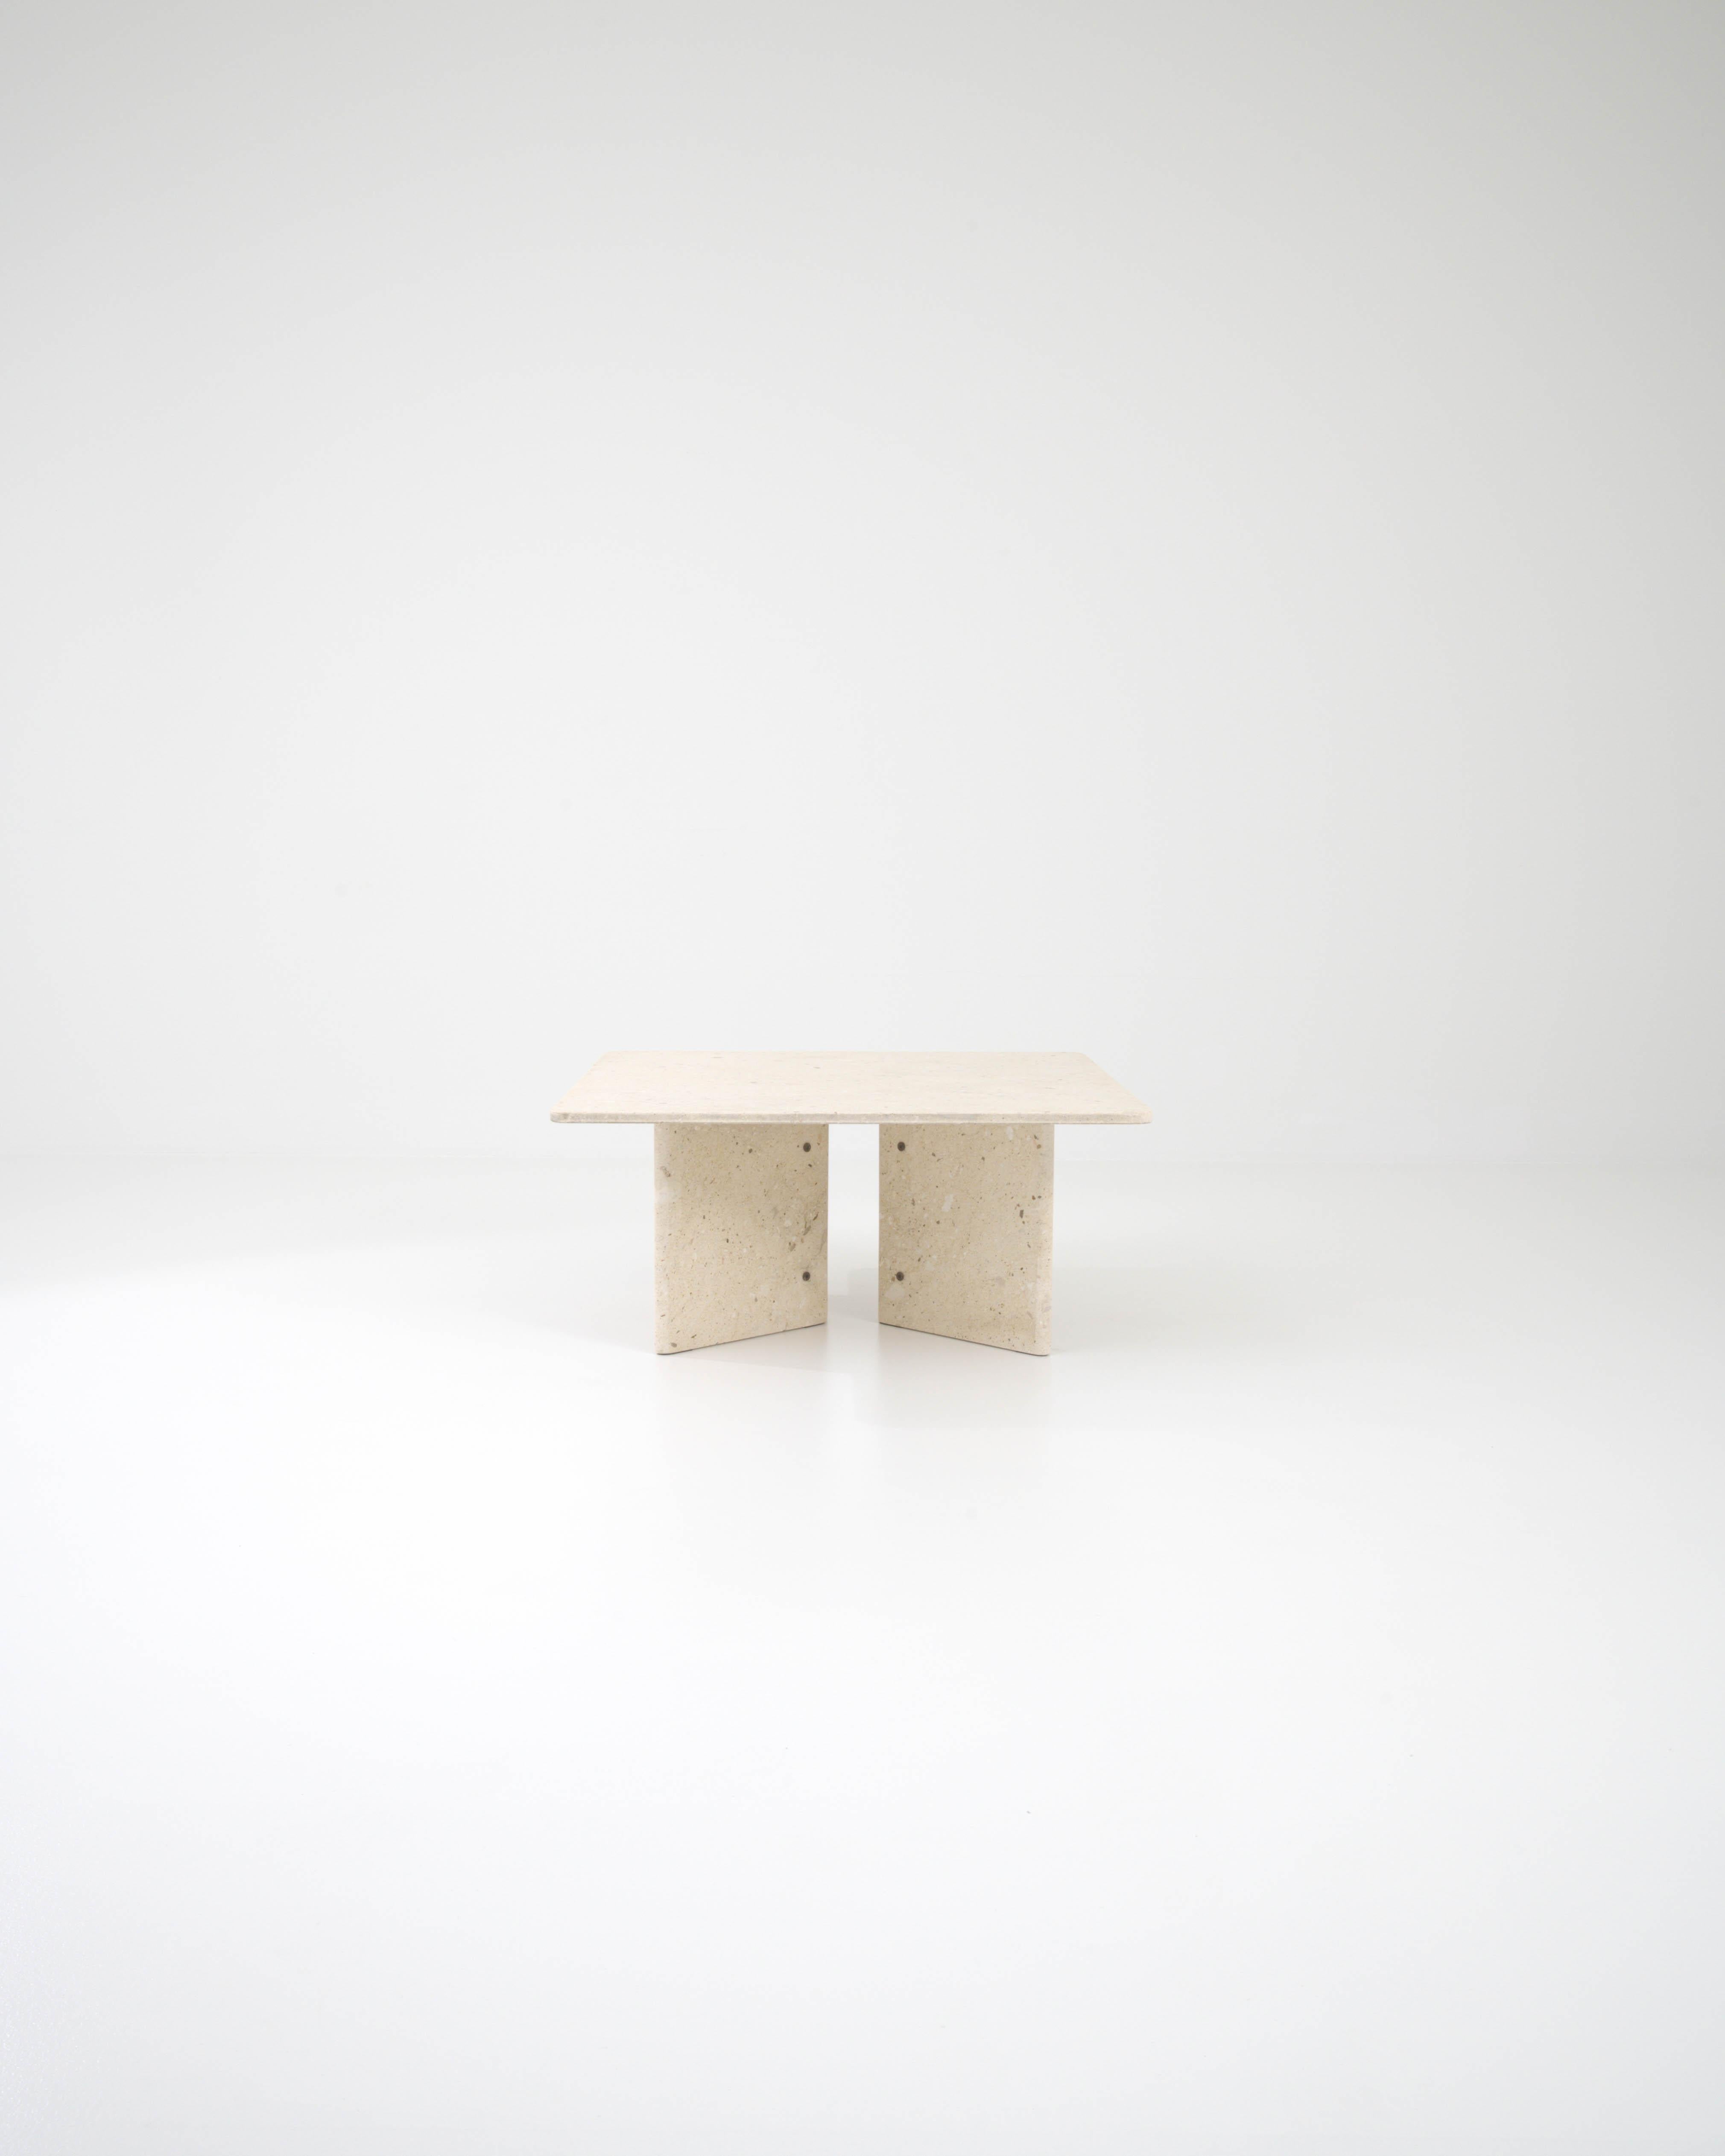 This sculptural table, crafted from cream colored marble in 20th century Italy, features a square slab as its tabletop, elegantly elevated on stone blocks. These blocks are artfully assembled like an open book and secured with metal rings, resulting